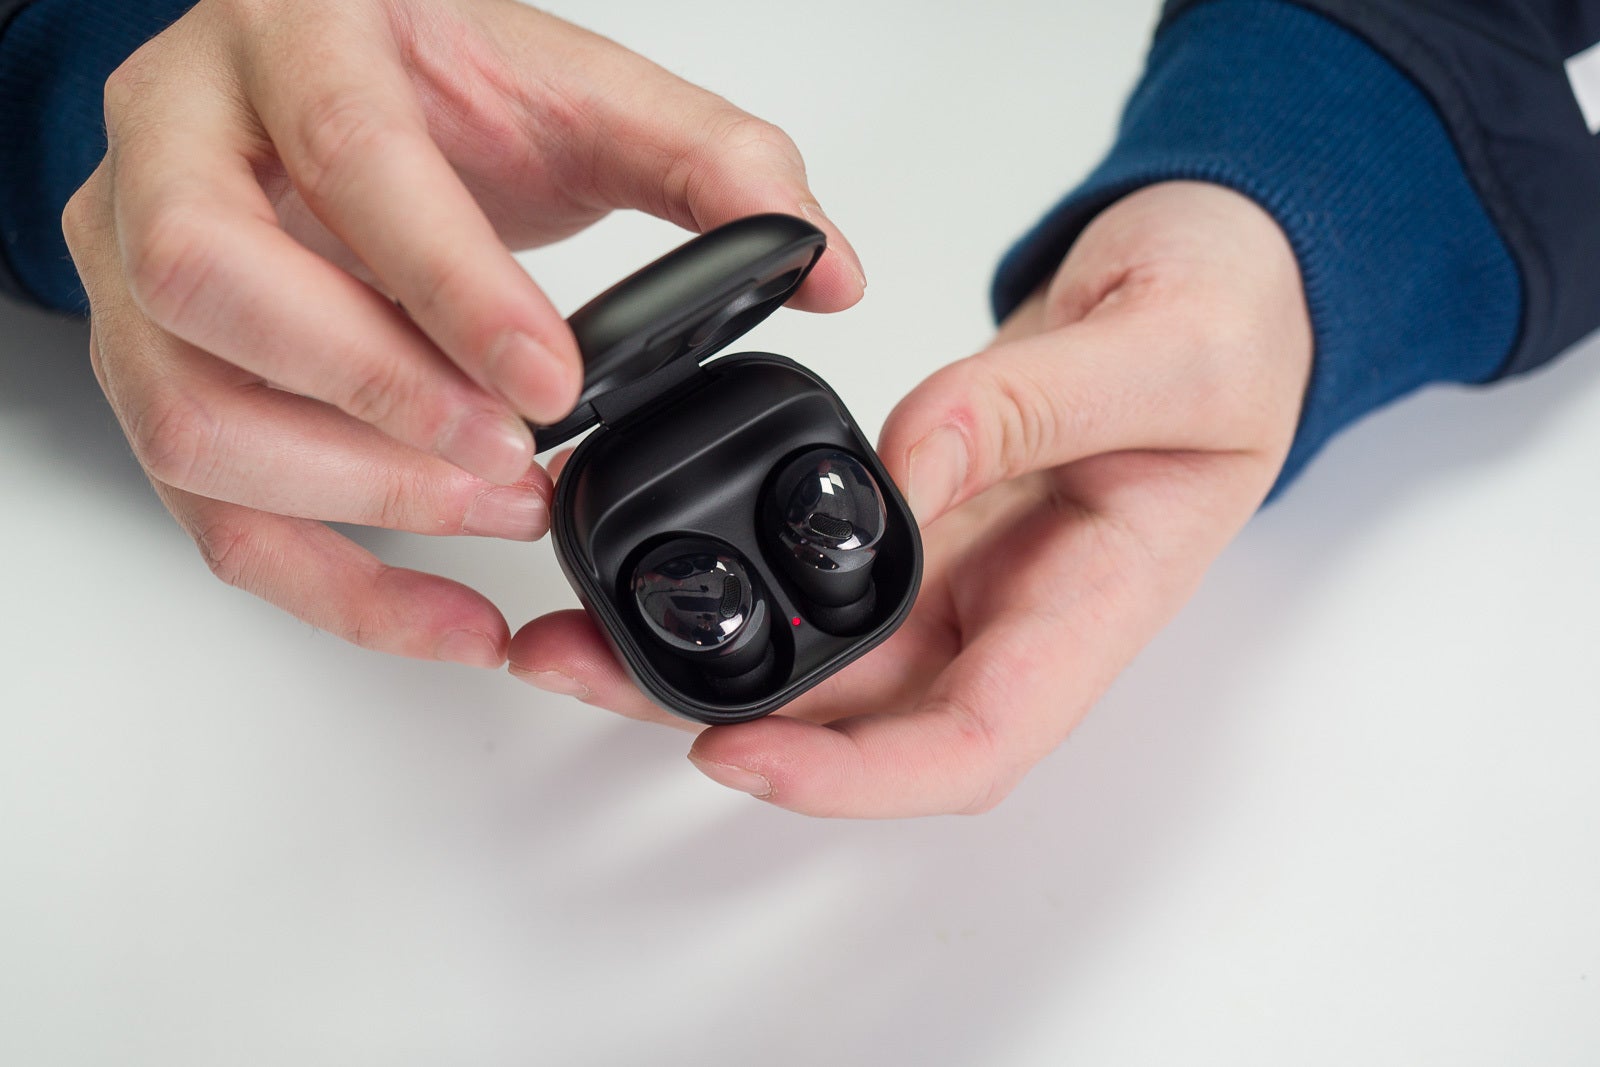 Best Samsung Galaxy Buds deals right now - updated March 2022